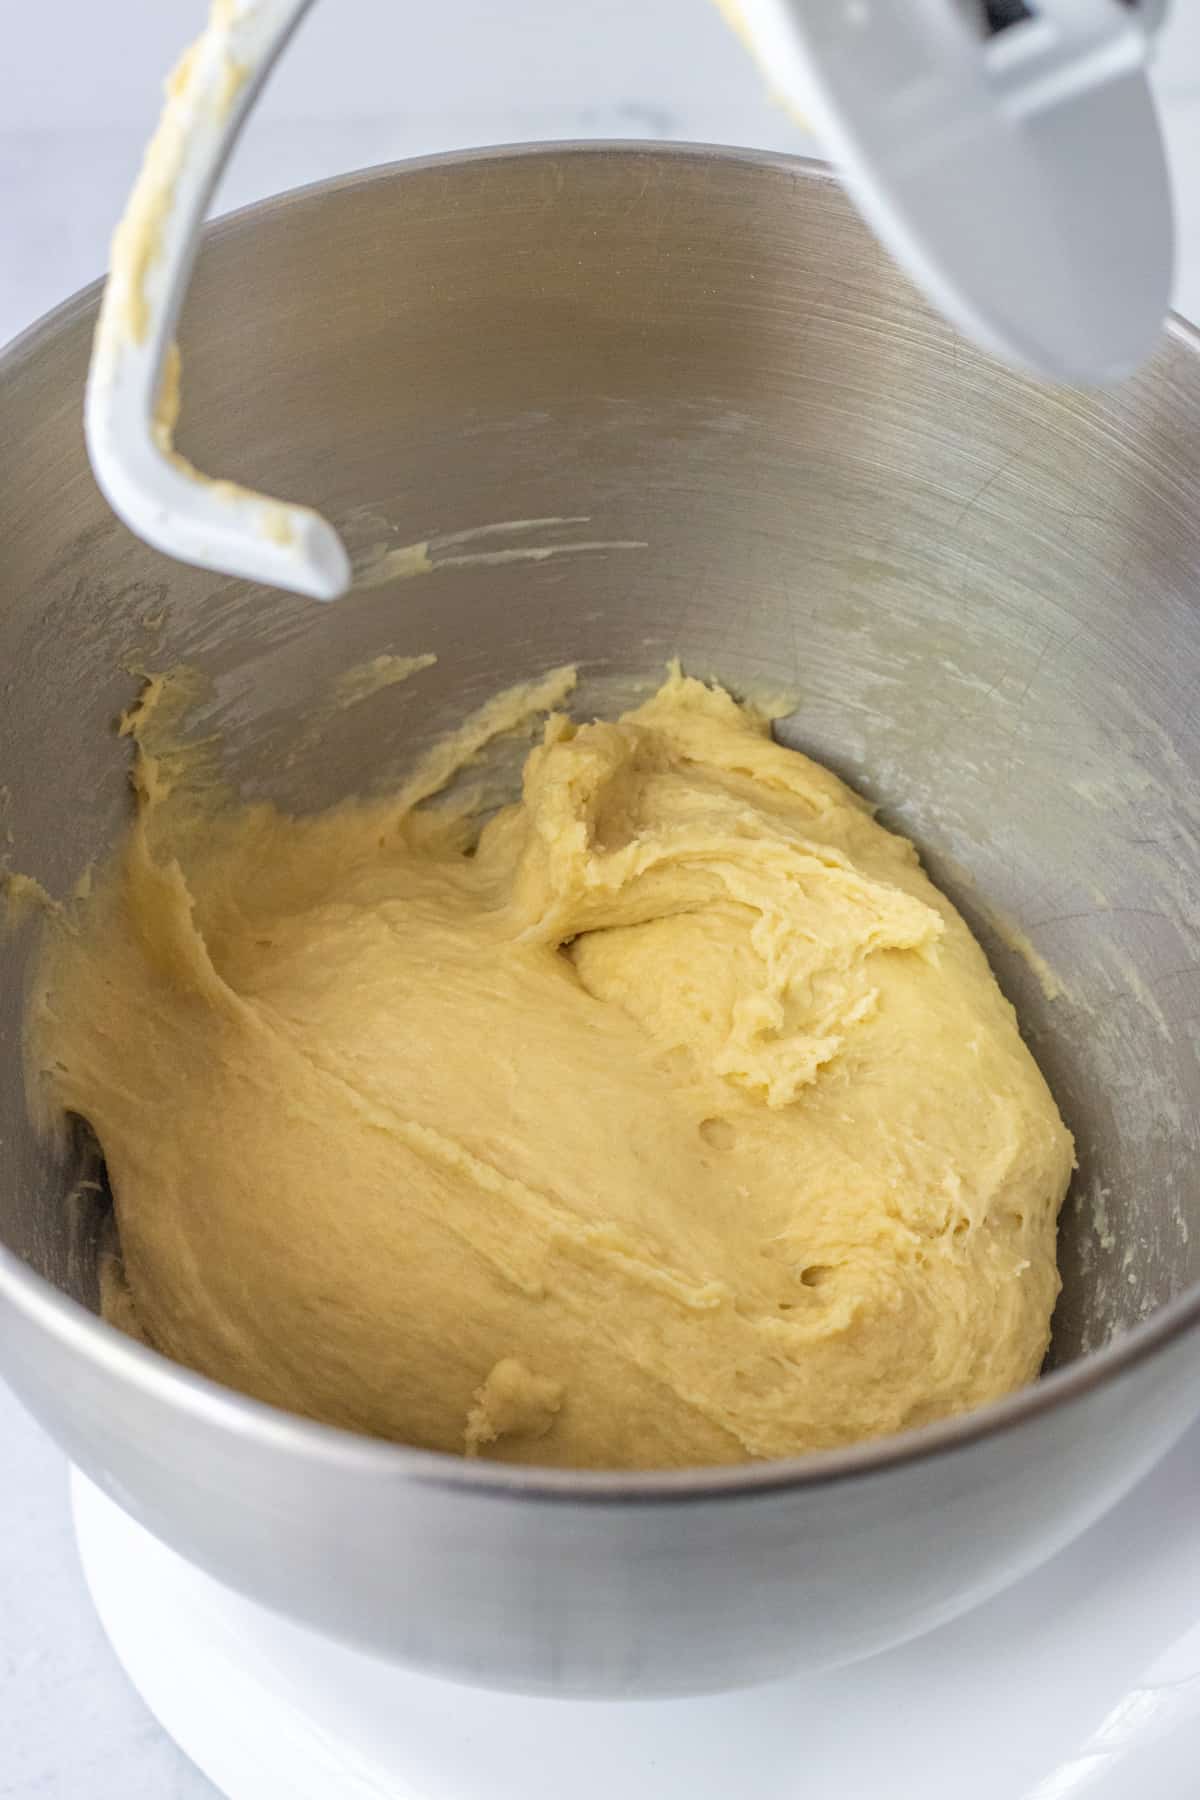 Dough in a stand mixer bowl.